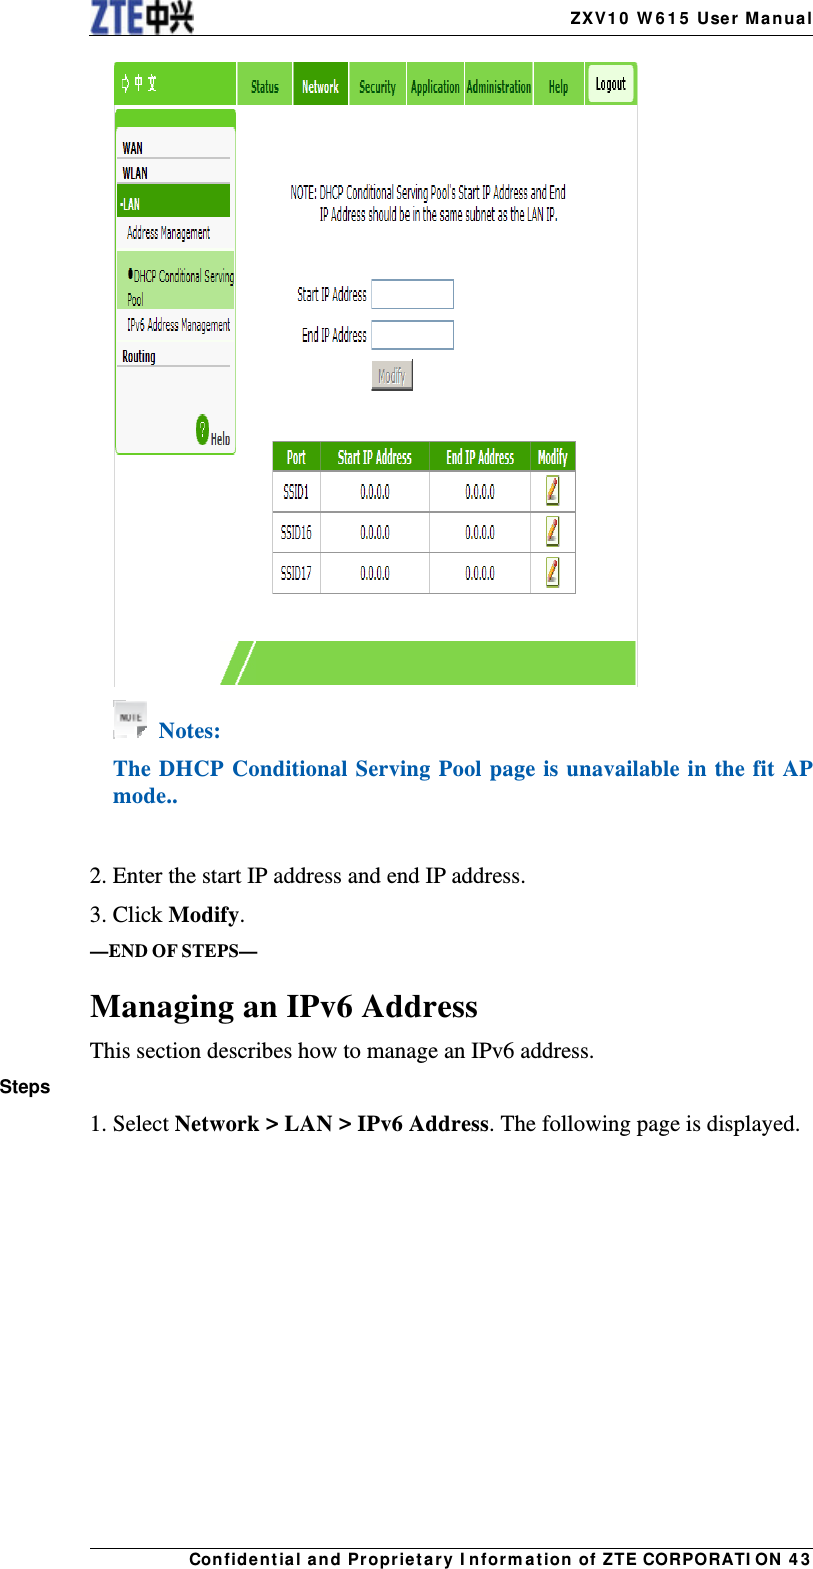    ZX V1 0  W 6 1 5  User Manua lCon fidentia l and Propriet a ry I nform a t ion of ZTE CORPORATI ON  4 3   Notes: The DHCP Conditional Serving Pool page is unavailable in the fit AP mode..   2. Enter the start IP address and end IP address. 3. Click Modify. —END OF STEPS— Managing an IPv6 Address This section describes how to manage an IPv6 address. Steps 1. Select Network &gt; LAN &gt; IPv6 Address. The following page is displayed. 